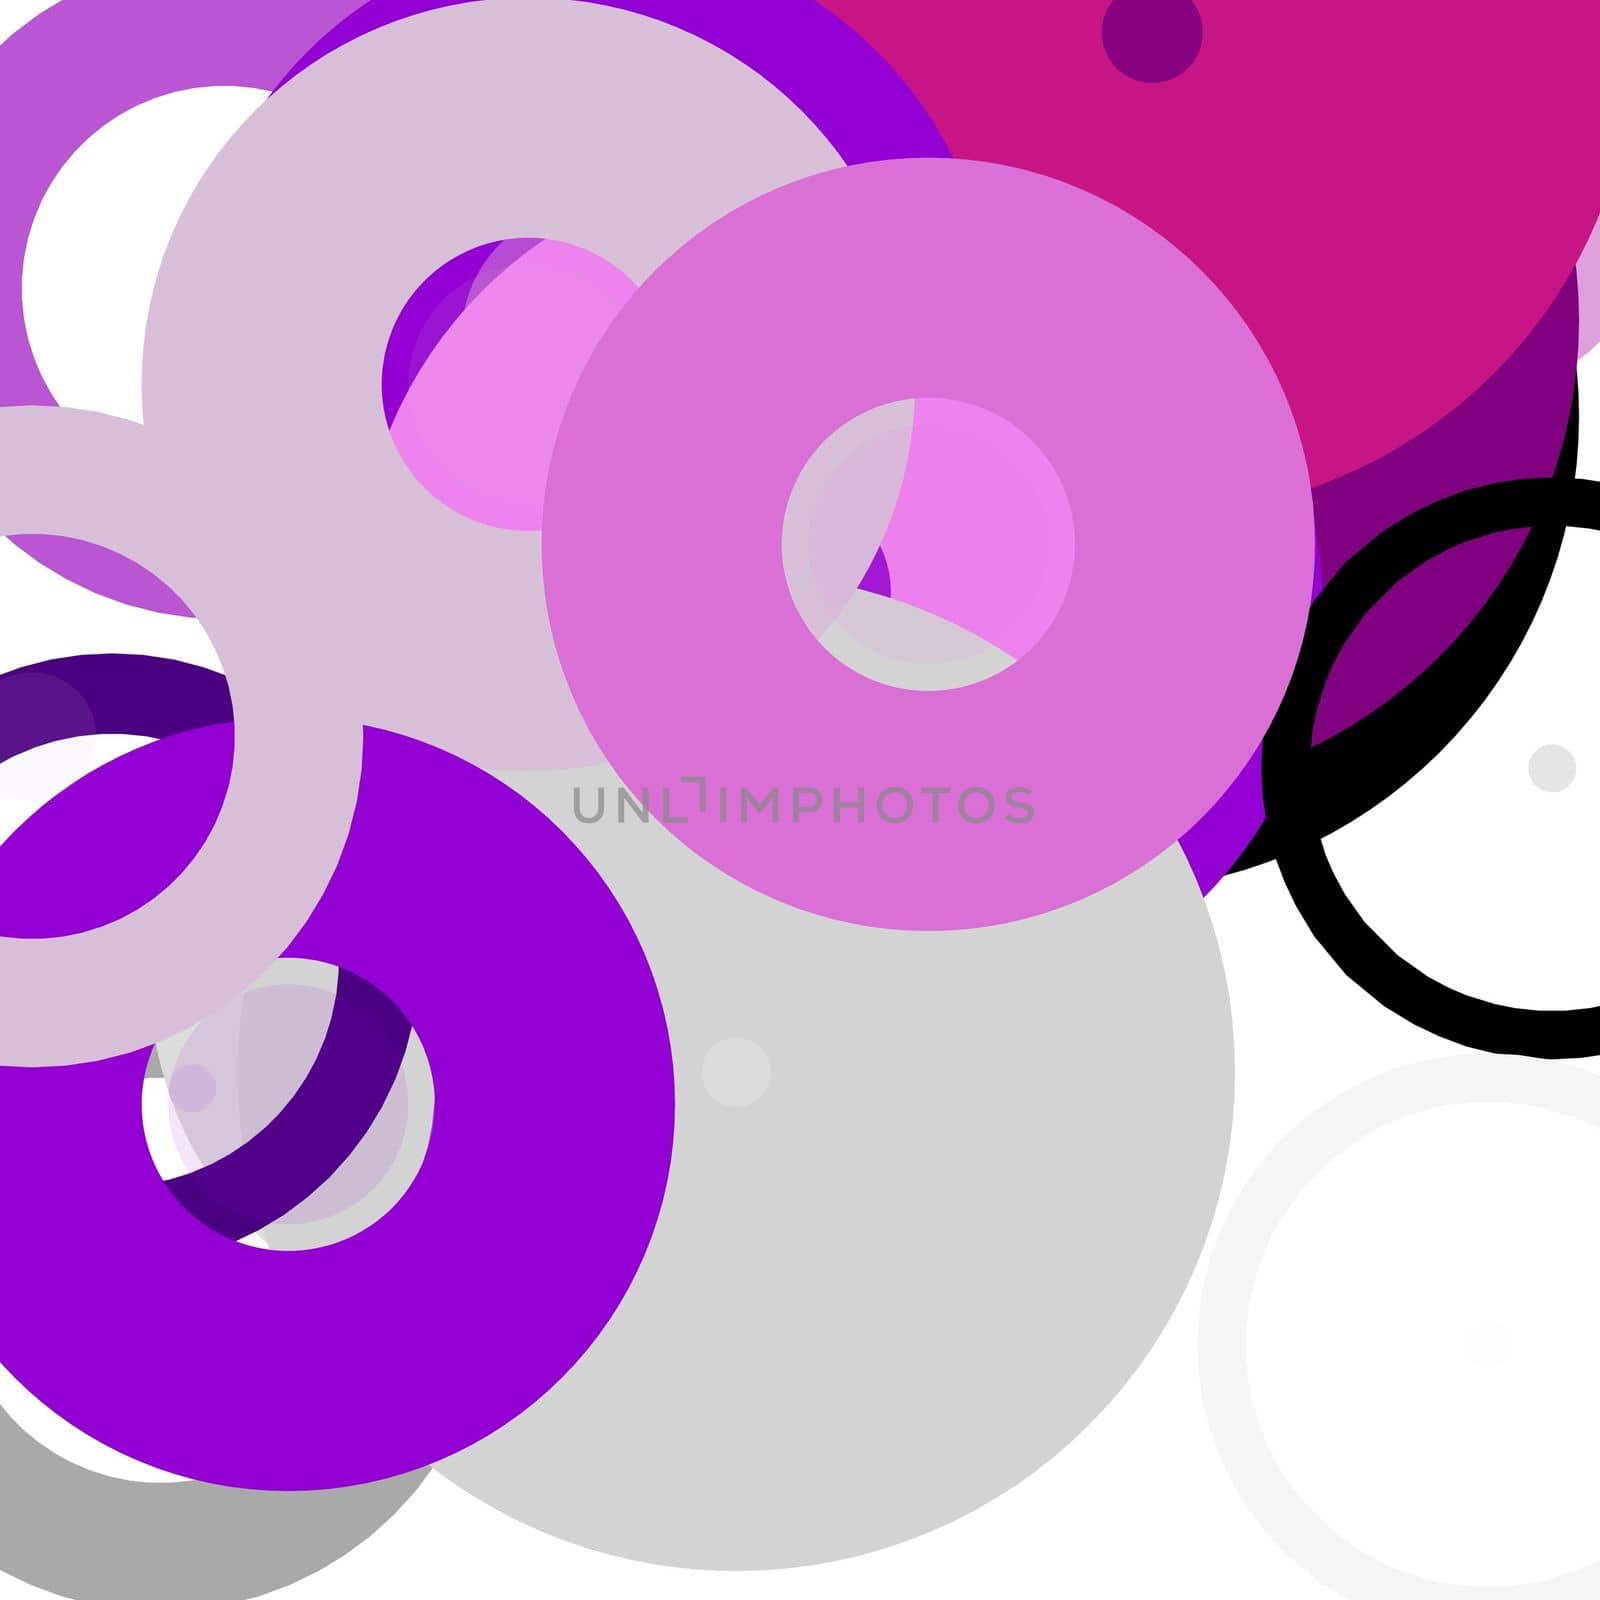 Abstract minimalist grey violet illustration with circles useful as a background